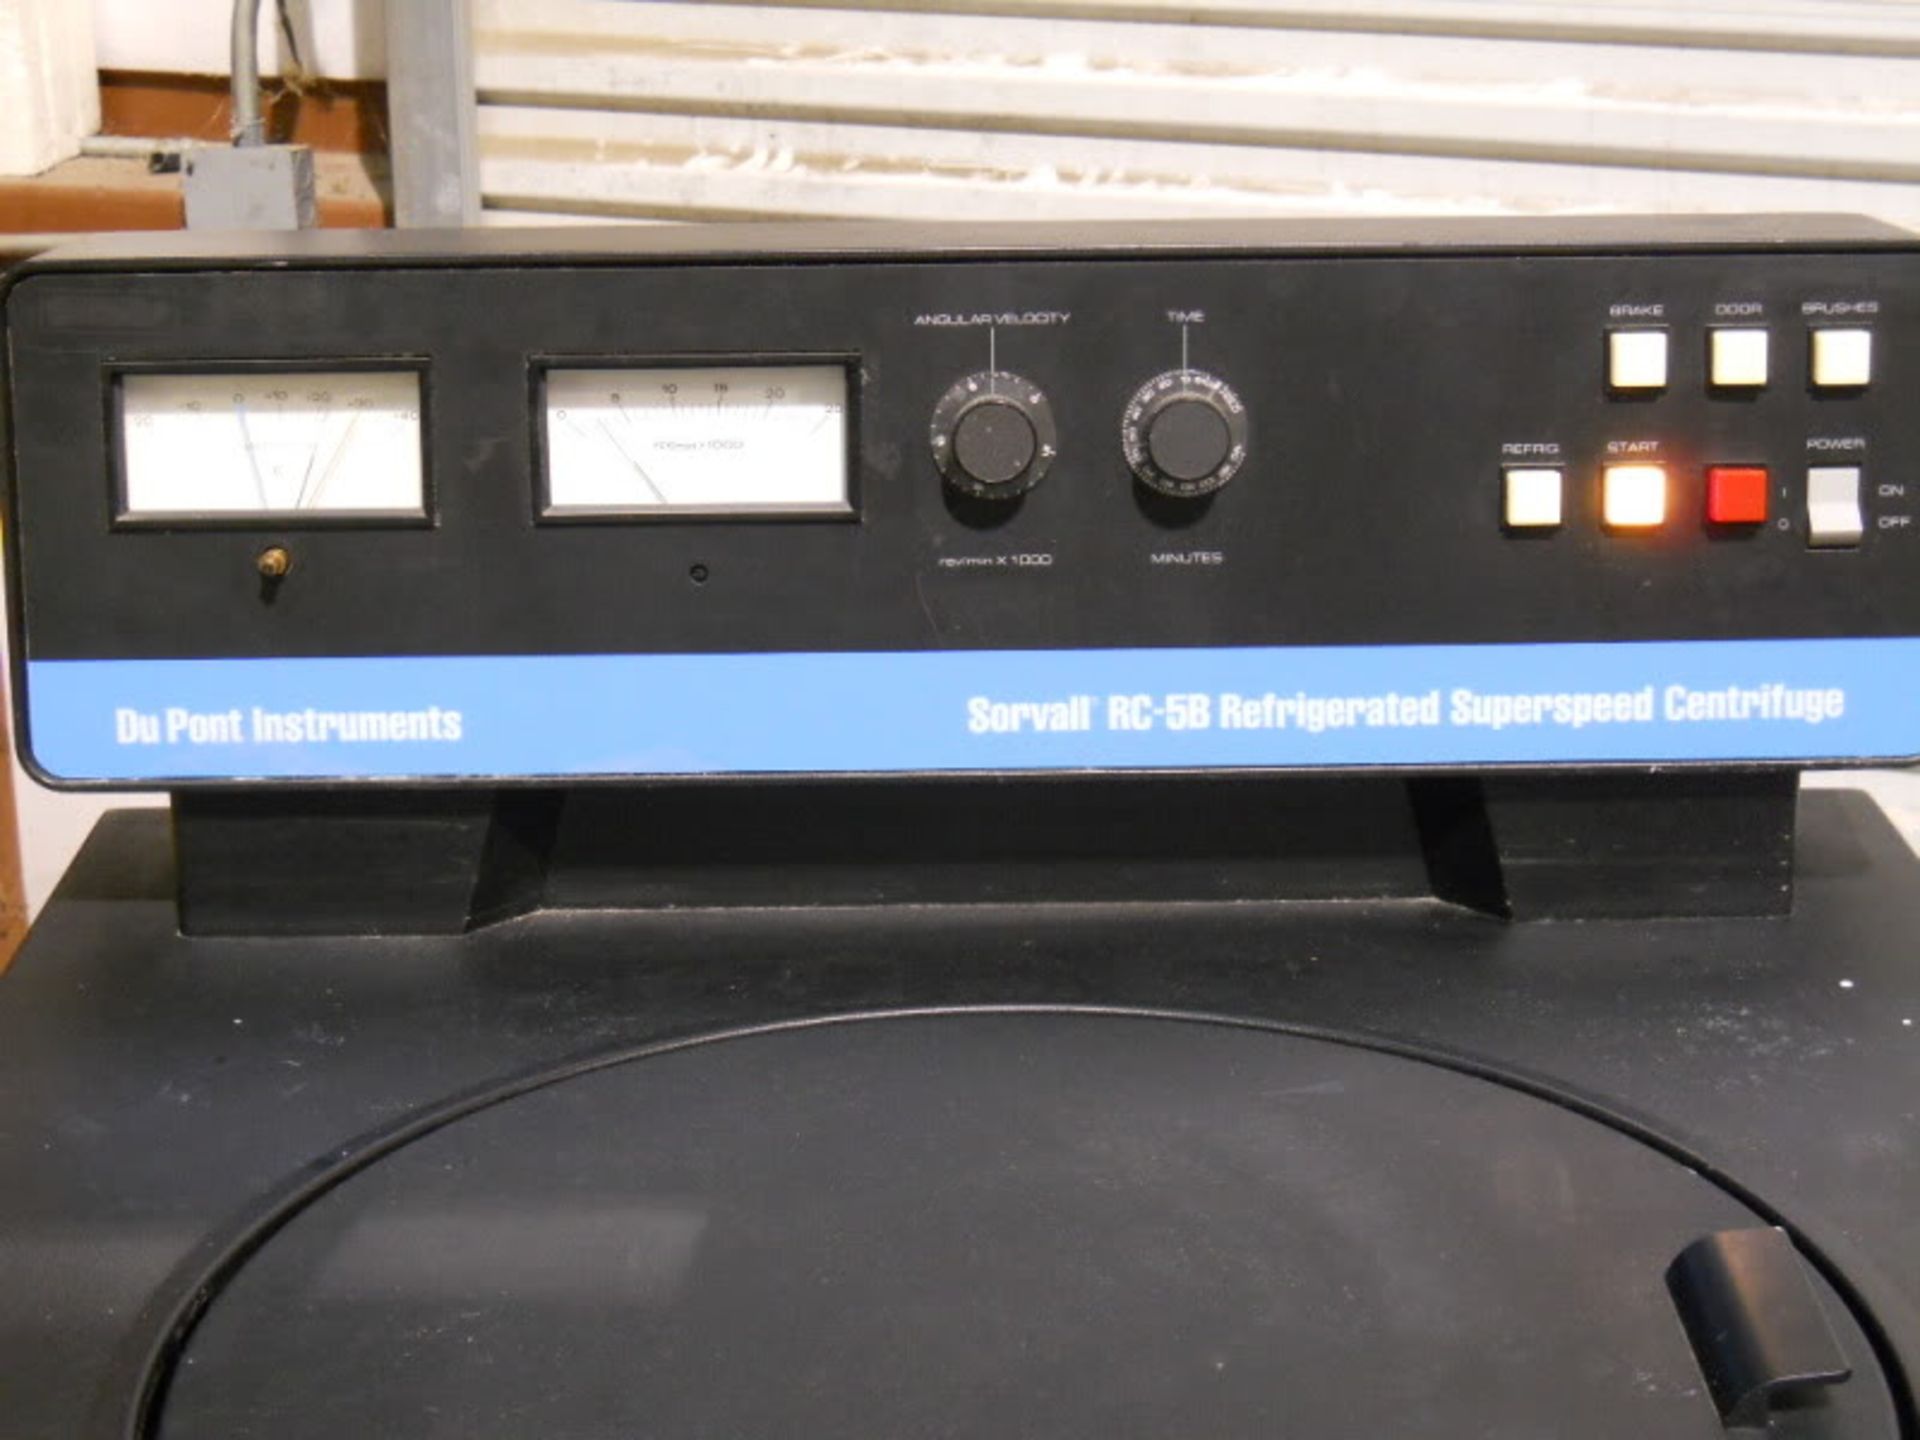 Dupont Instruments Sorvall RC-5B Refrigerated Superspeed Centrifuge (Parts), Qty 1, 320972407595 - Image 3 of 9